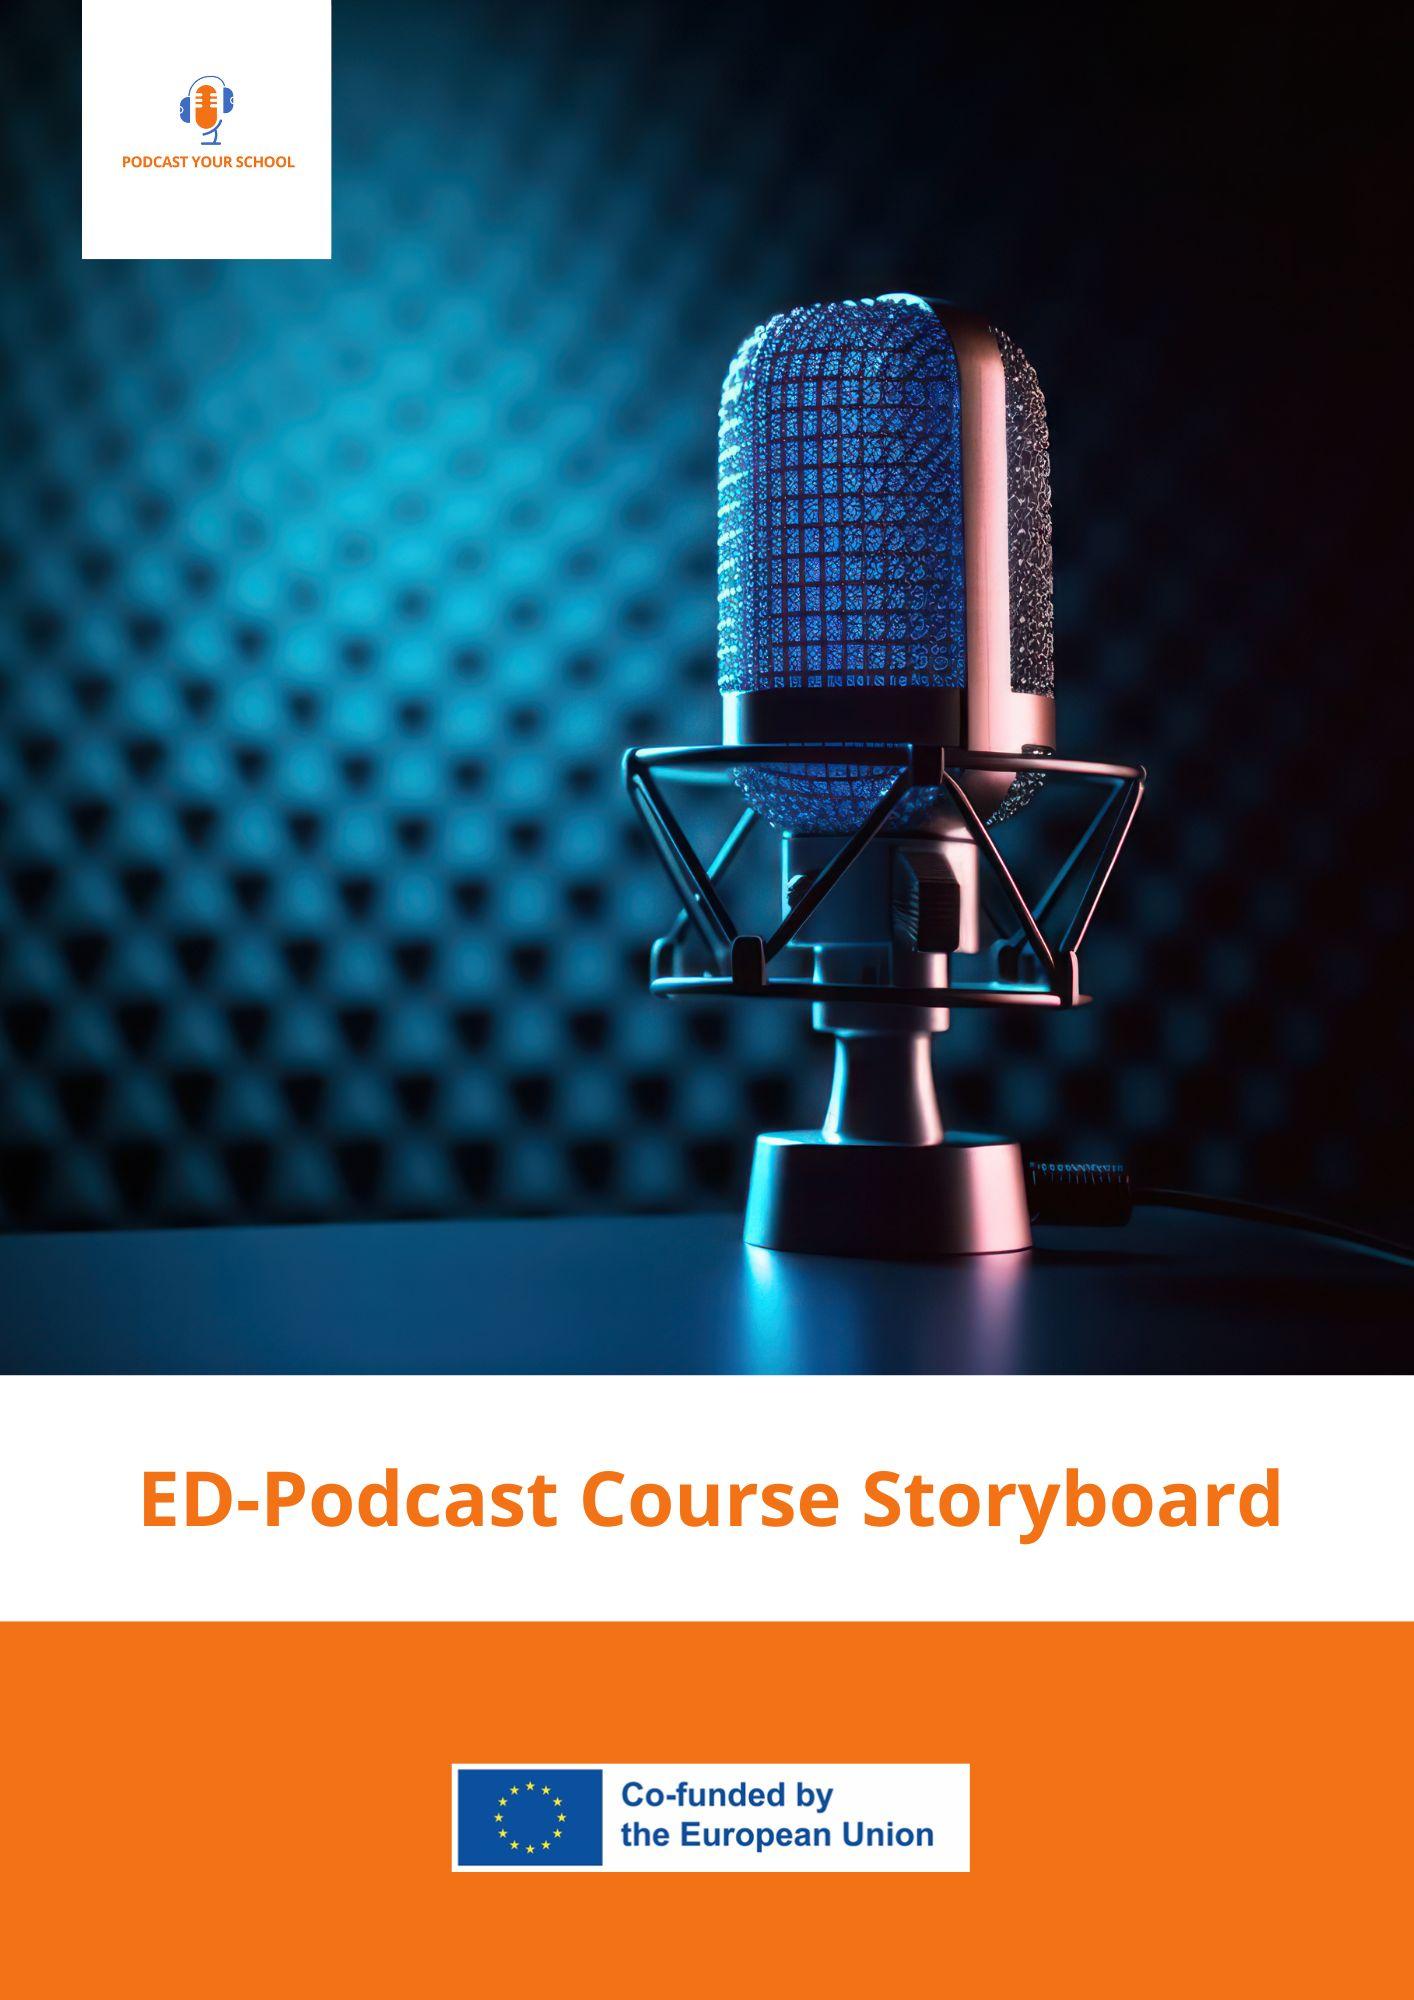 The “Ed-Podcast Course Storyboard” now available!